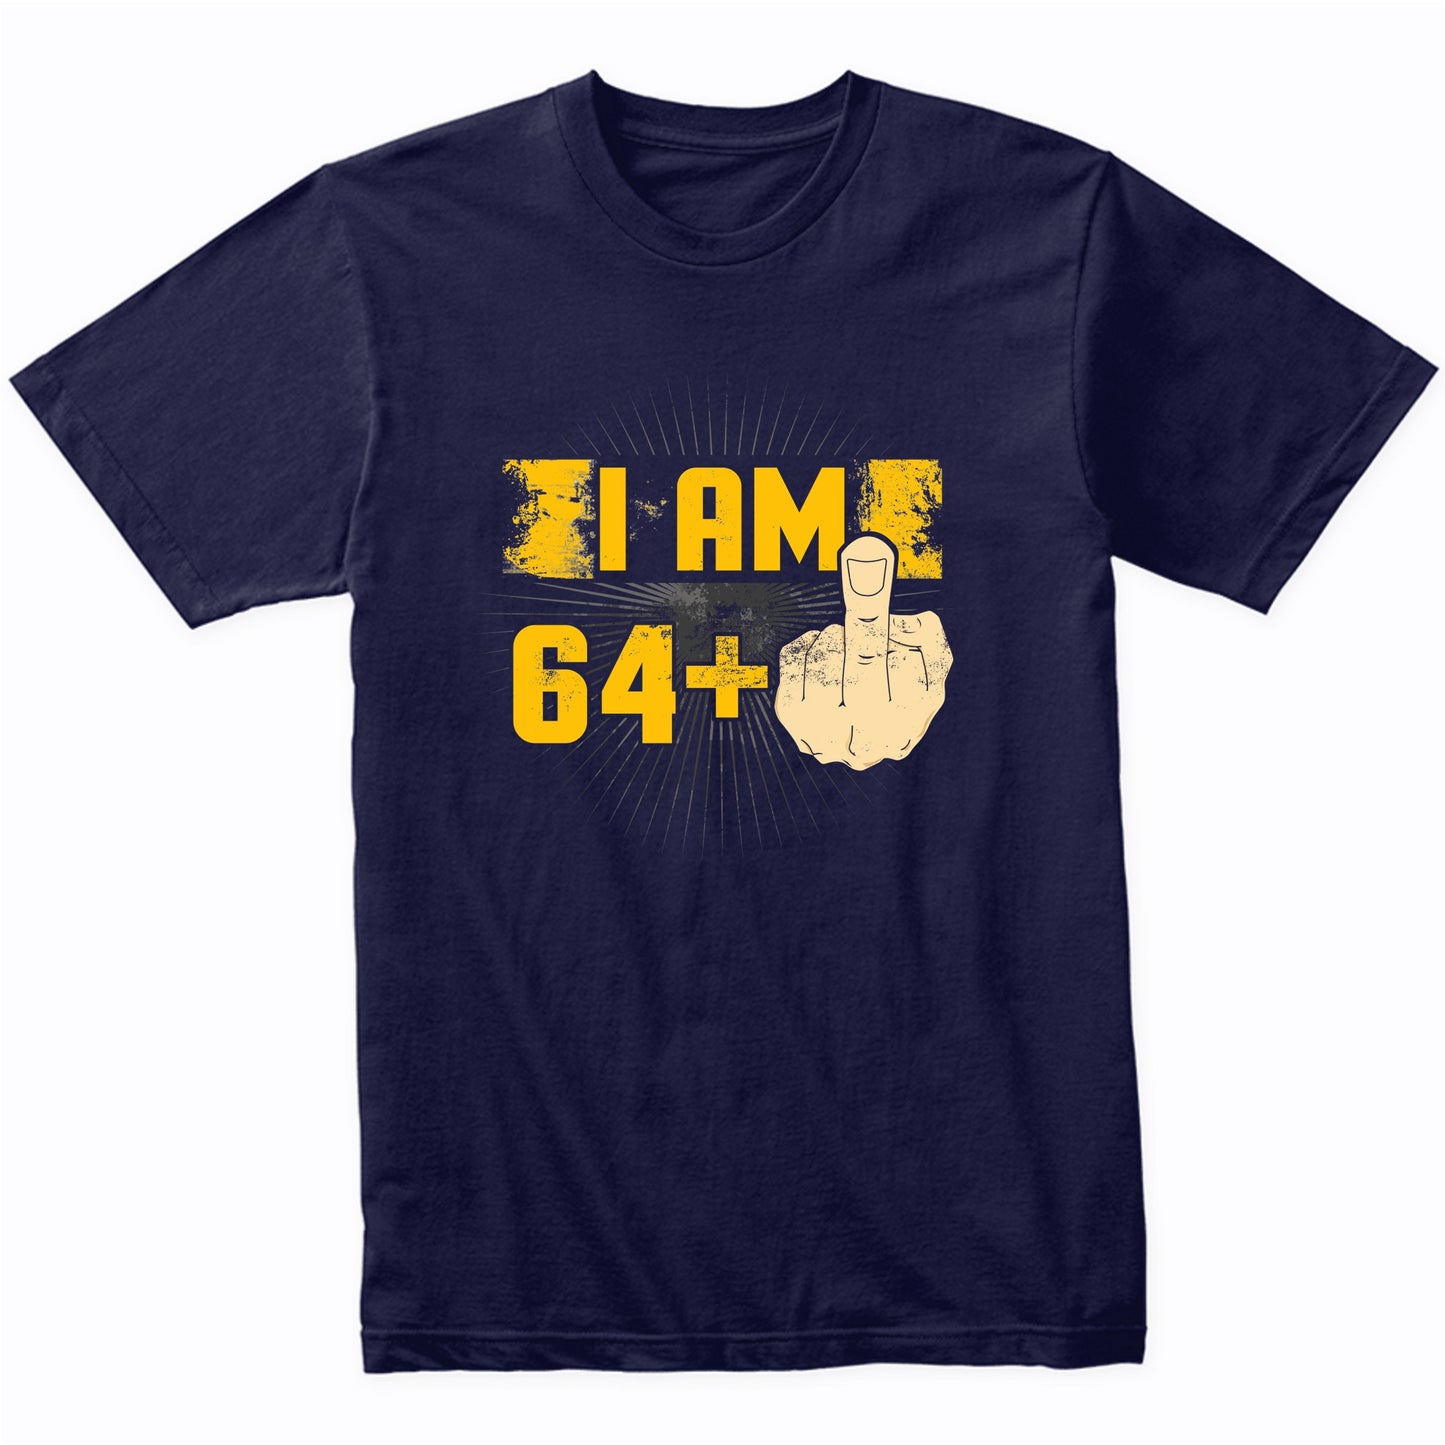 65th Birthday Shirt For Men - I Am 64 Plus Middle Finger 65 Years Old T-Shirt